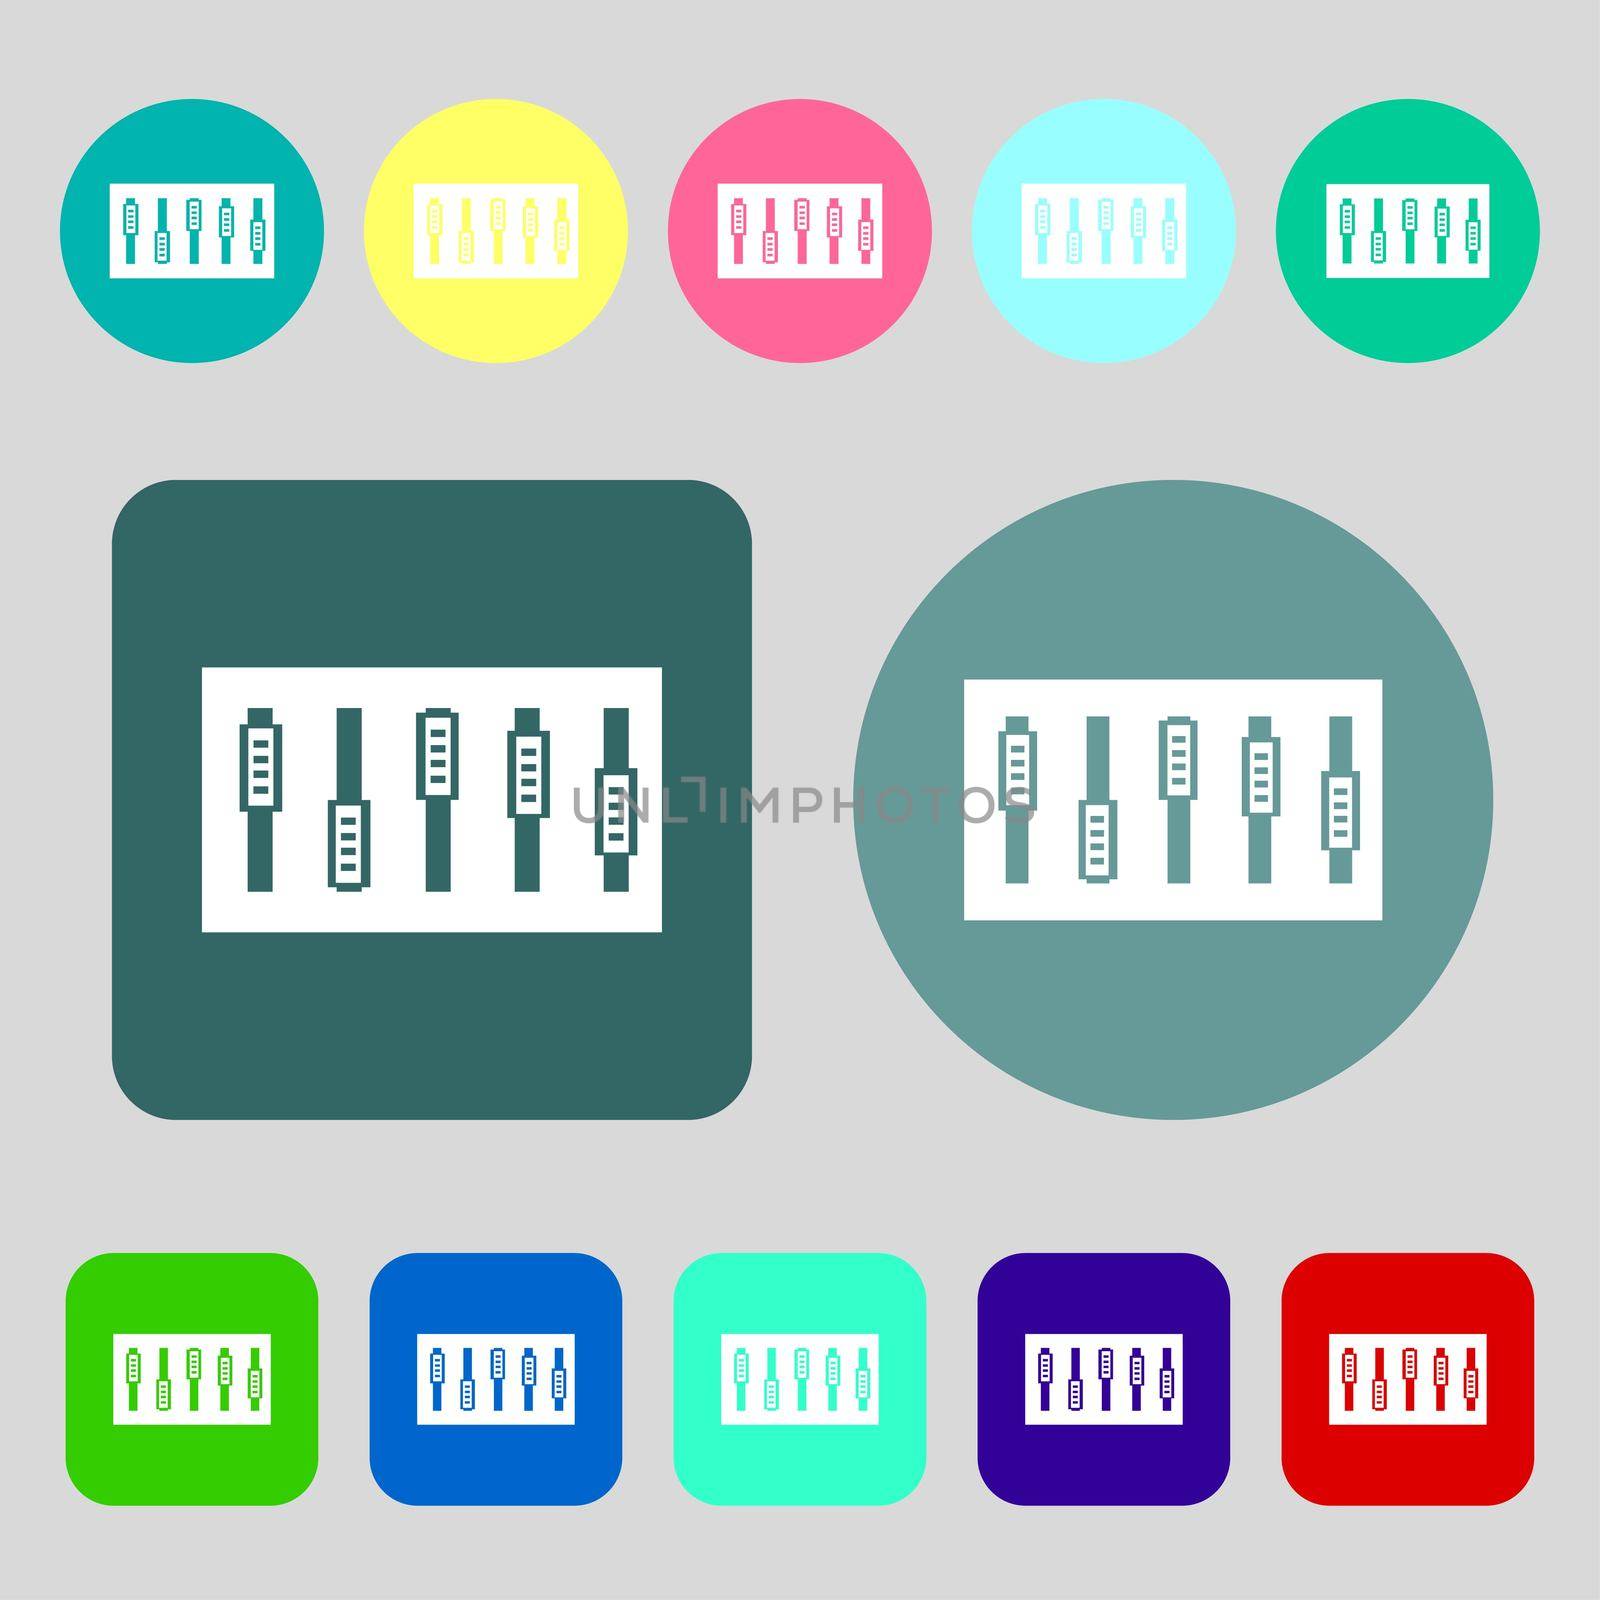 Dj console mix handles and buttons icon symbol.12 colored buttons. Flat design. illustration